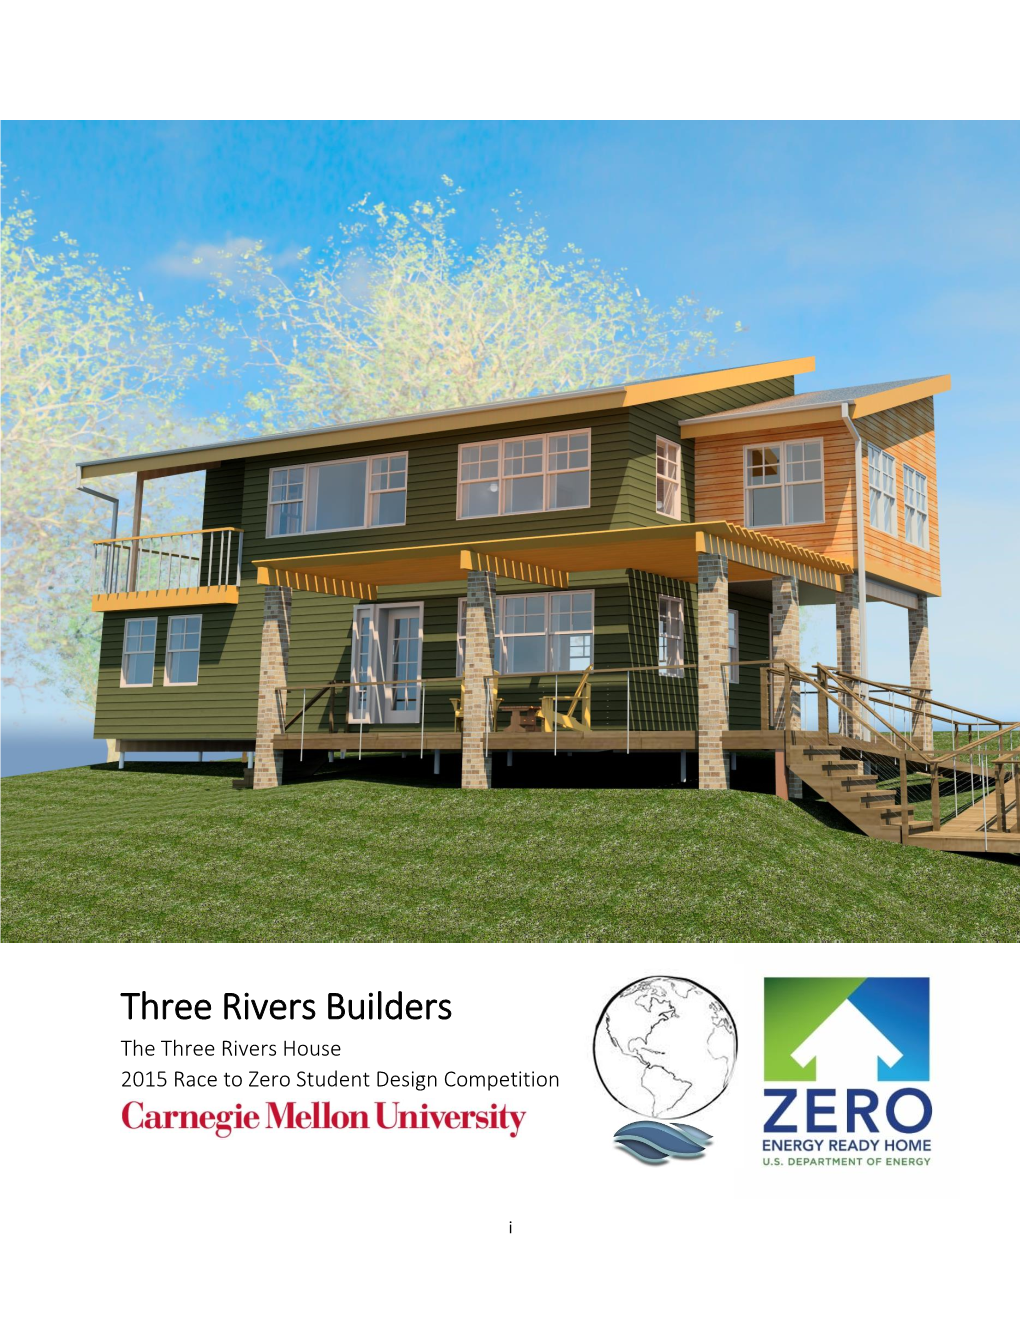 Three Rivers Builders the Three Rivers House 2015 Race to Zero Student Design Competition